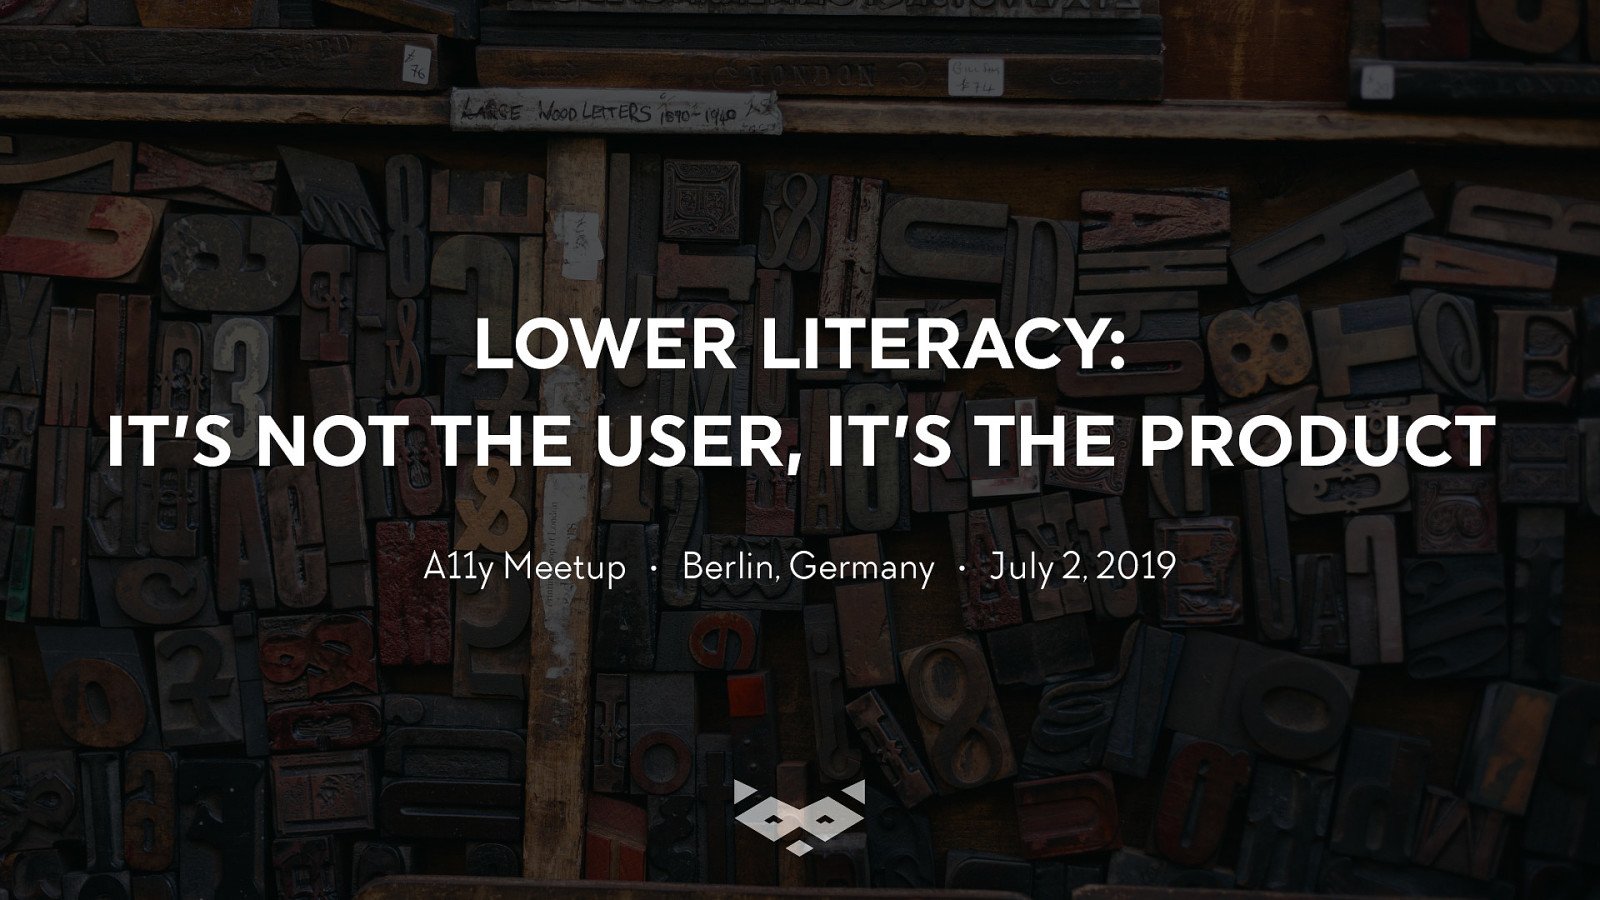 Lower literacy: it’s not the user, it’s the product!